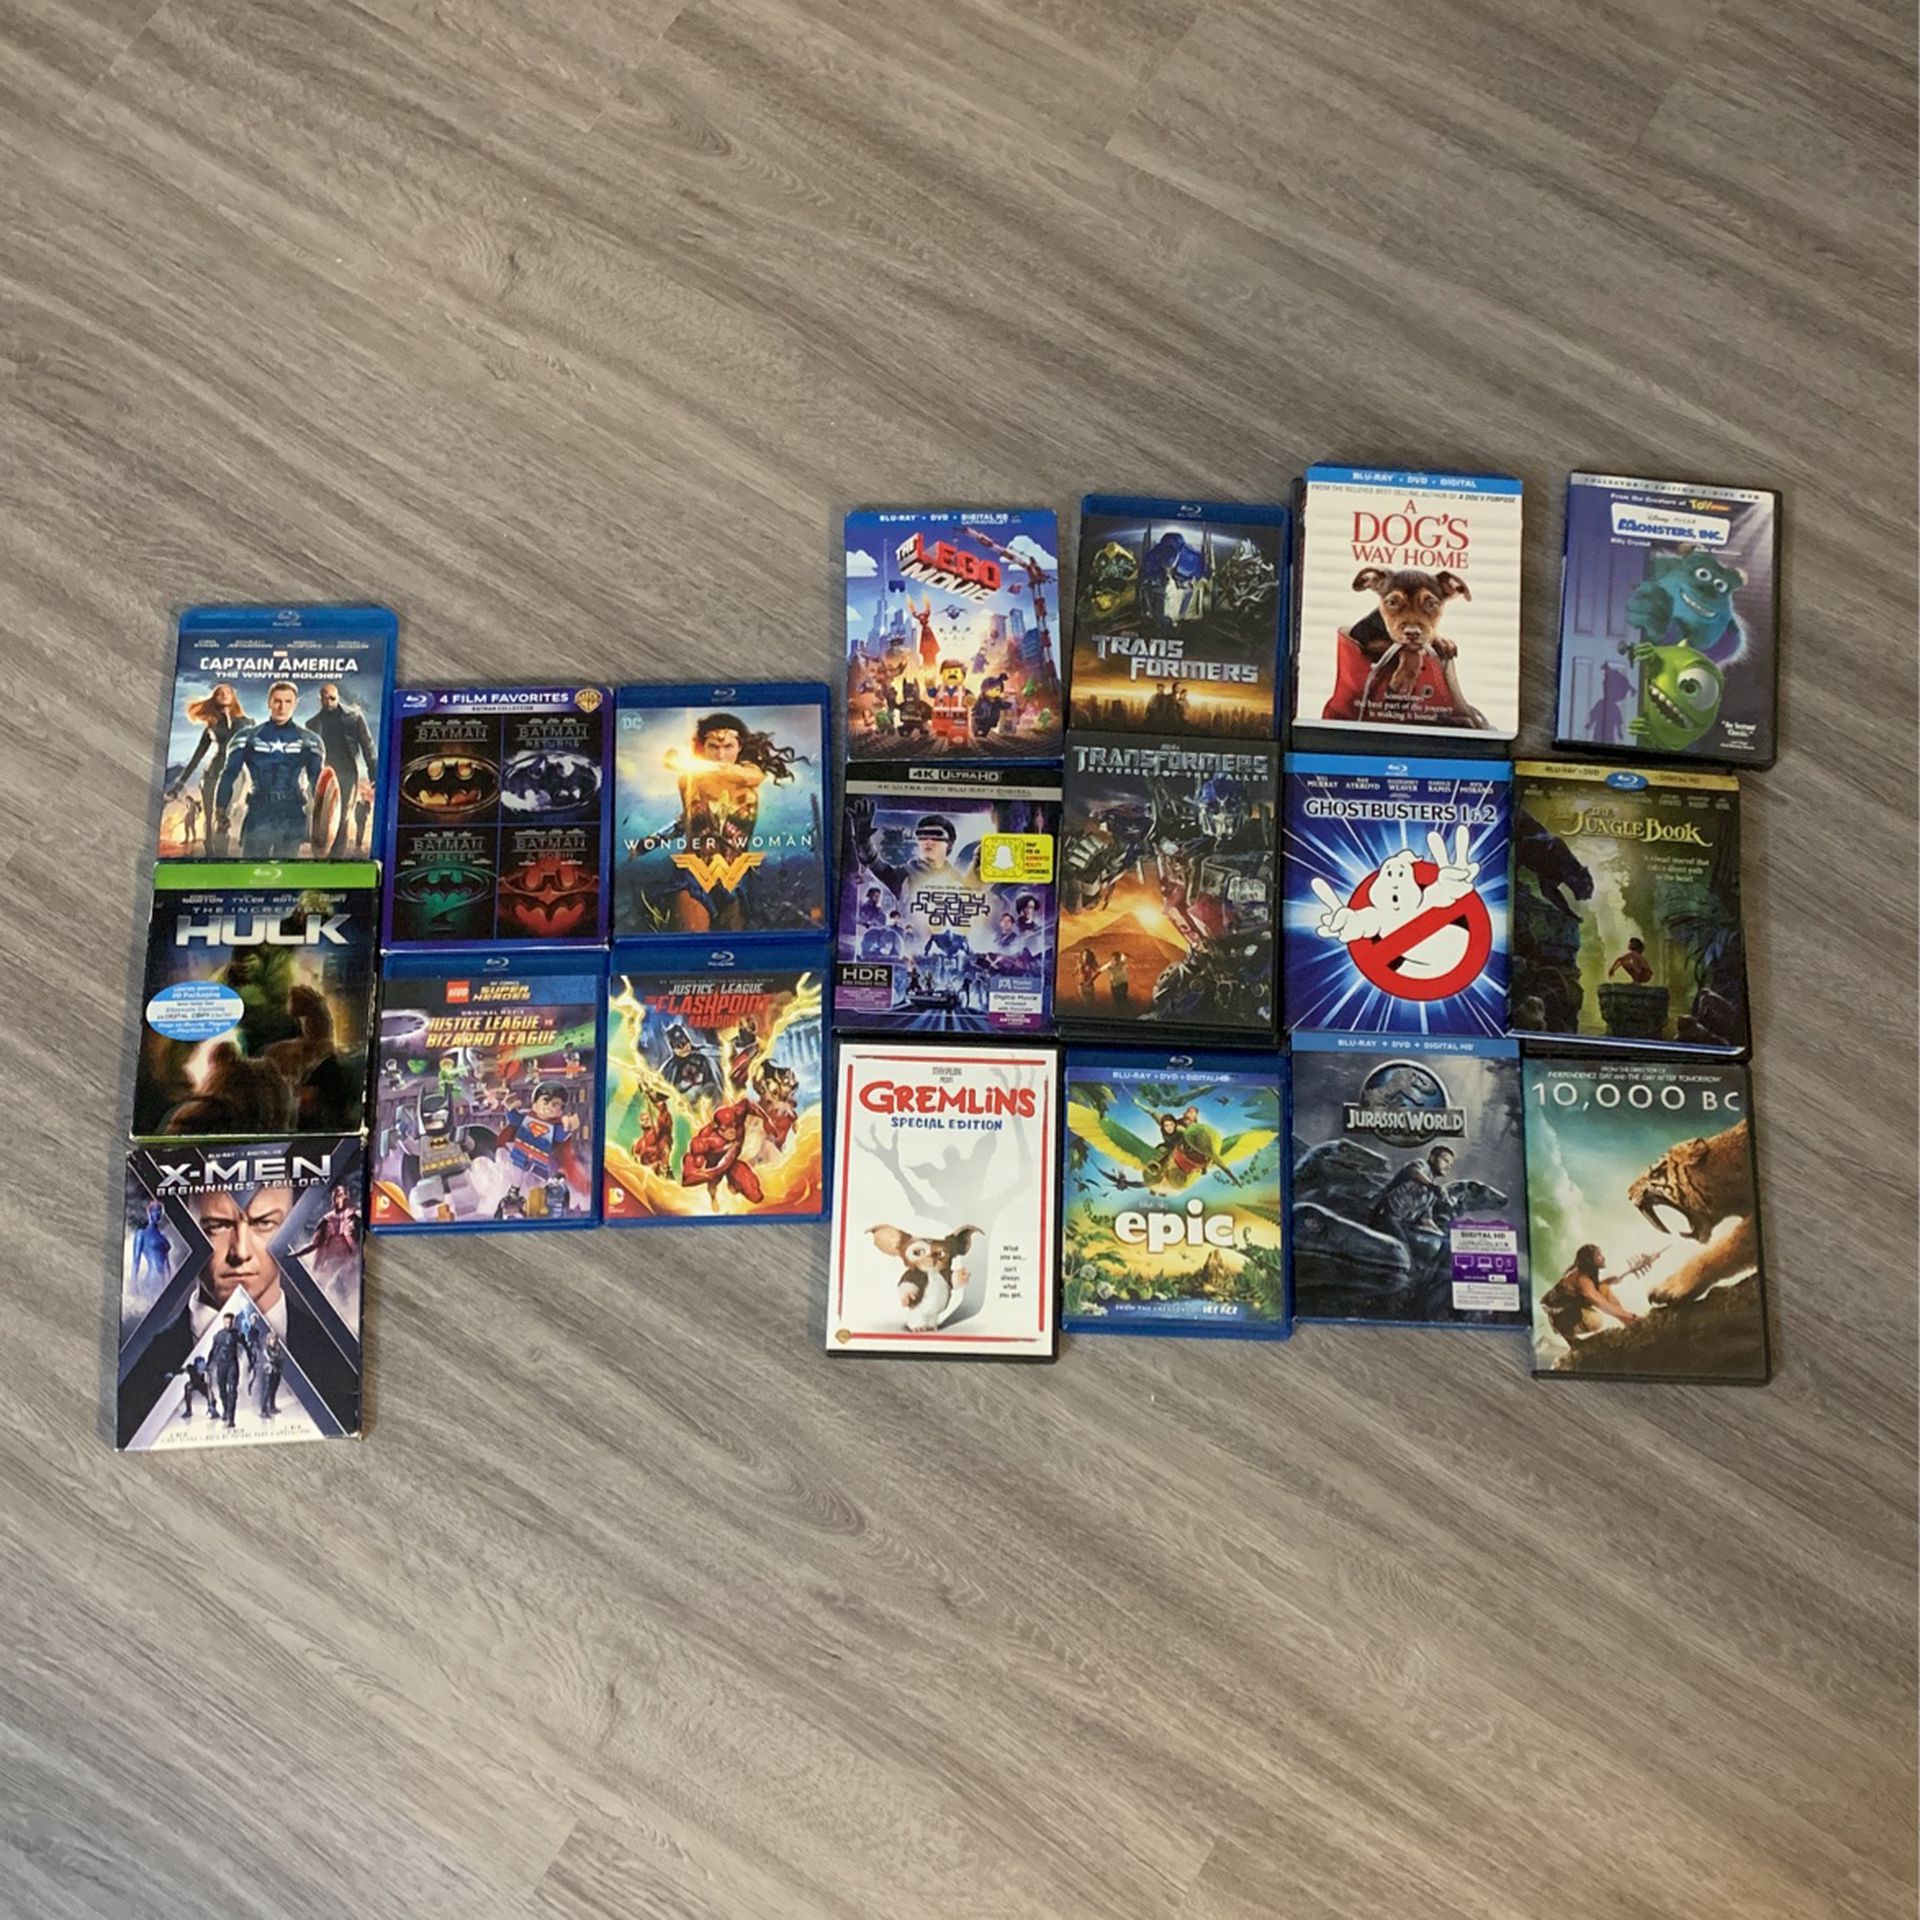 22 Marvel,Pixar And Family Movies 